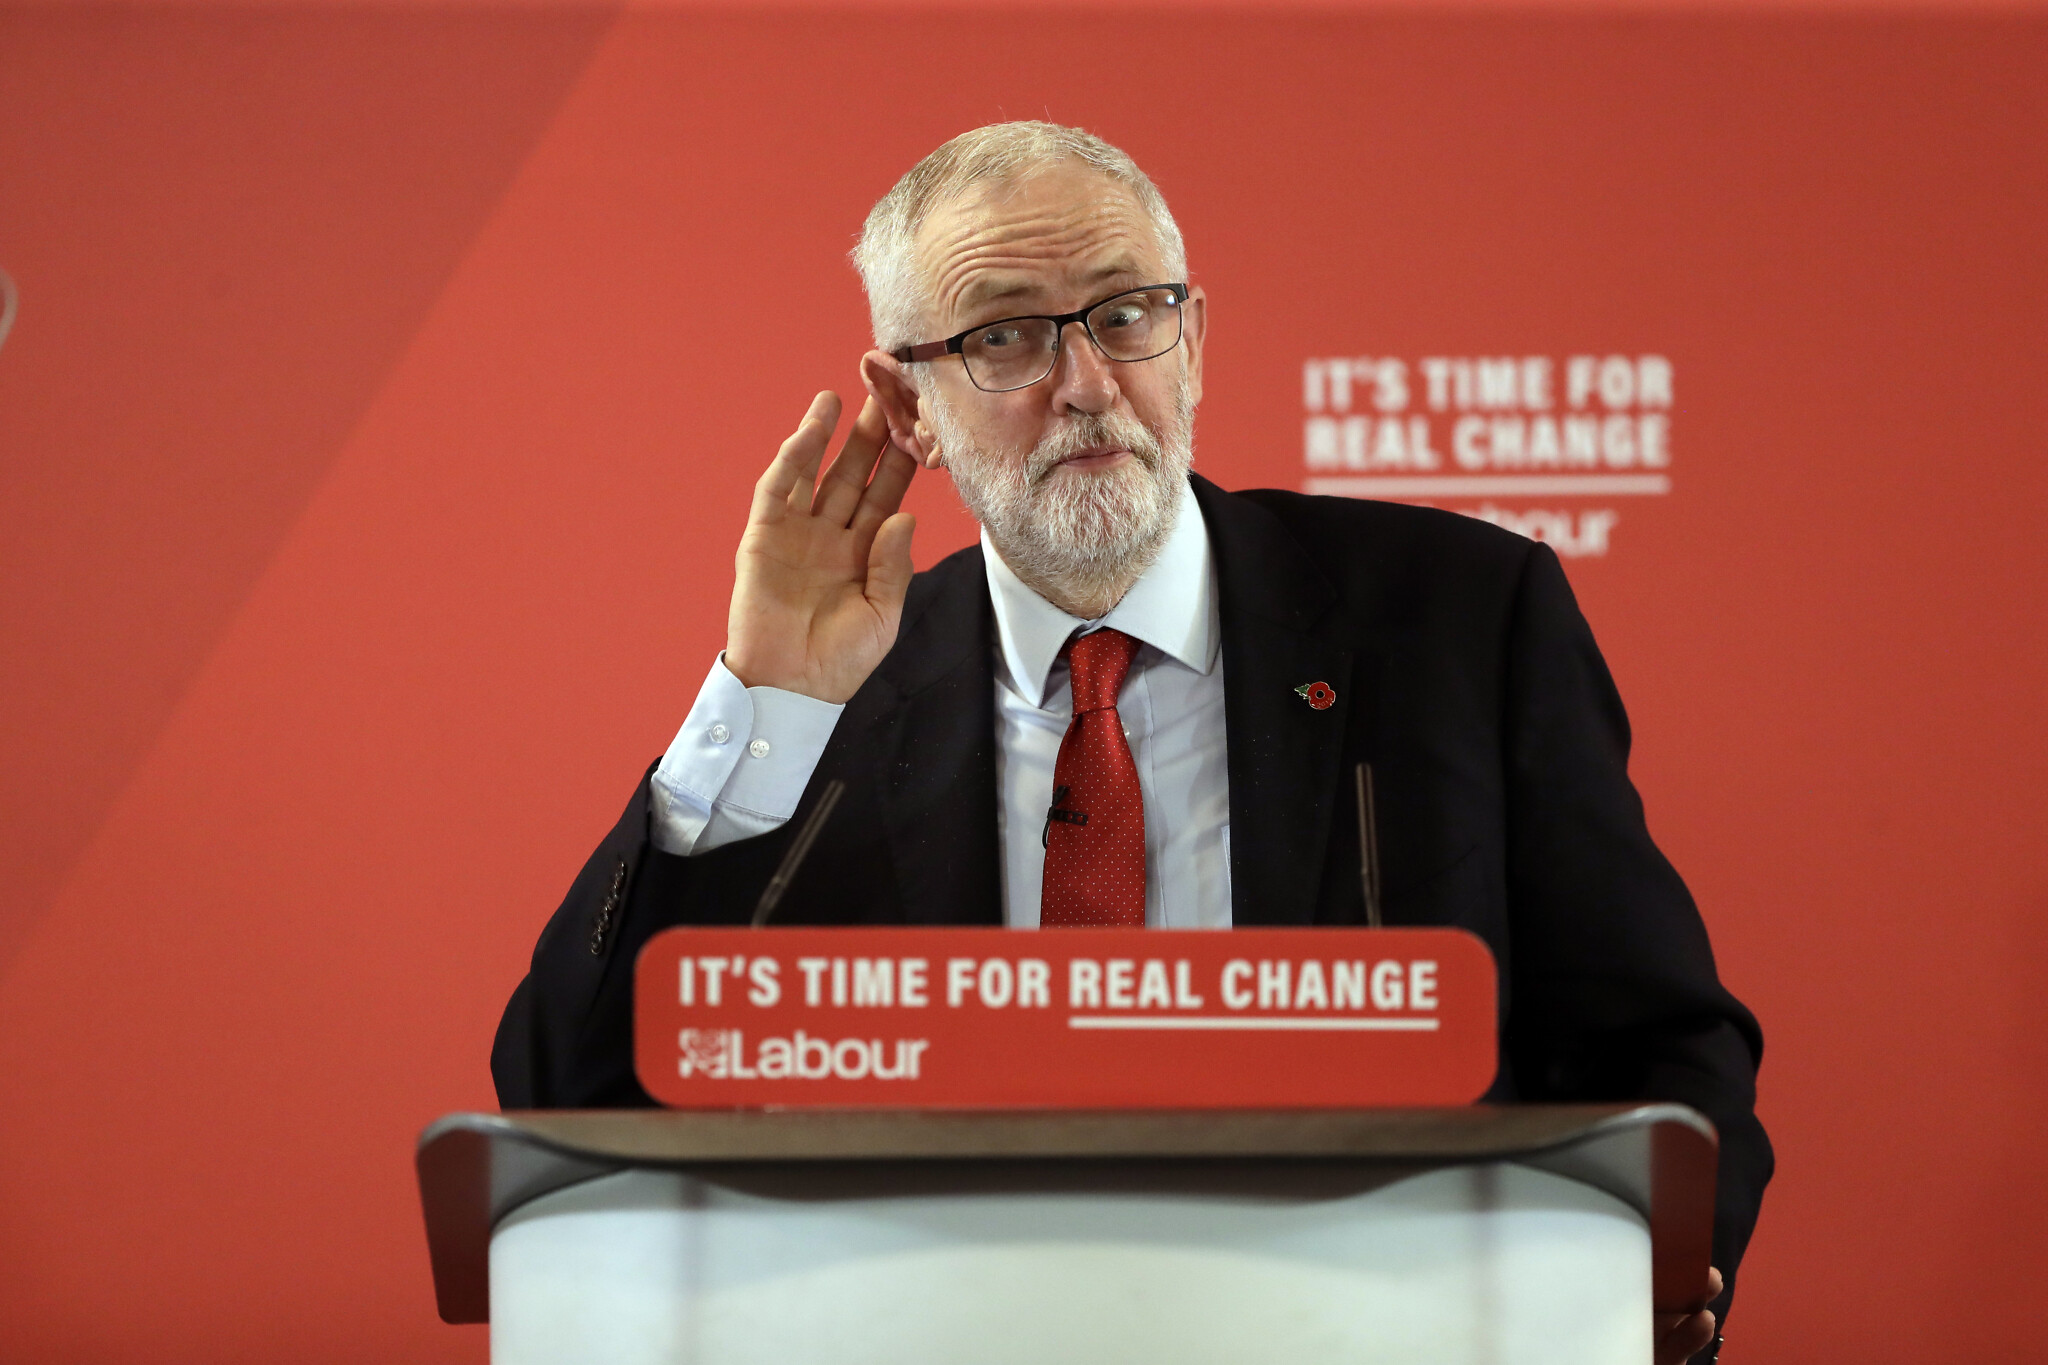 Britain's opposition Labour party leader Jeremy Corbyn delivers a speech during an election campaign event on Brexit in Harlow, England, Tuesday, Nov. 5, 2019. Britain goes to the polls on Dec. 12. (AP Photo/Matt Dunham)